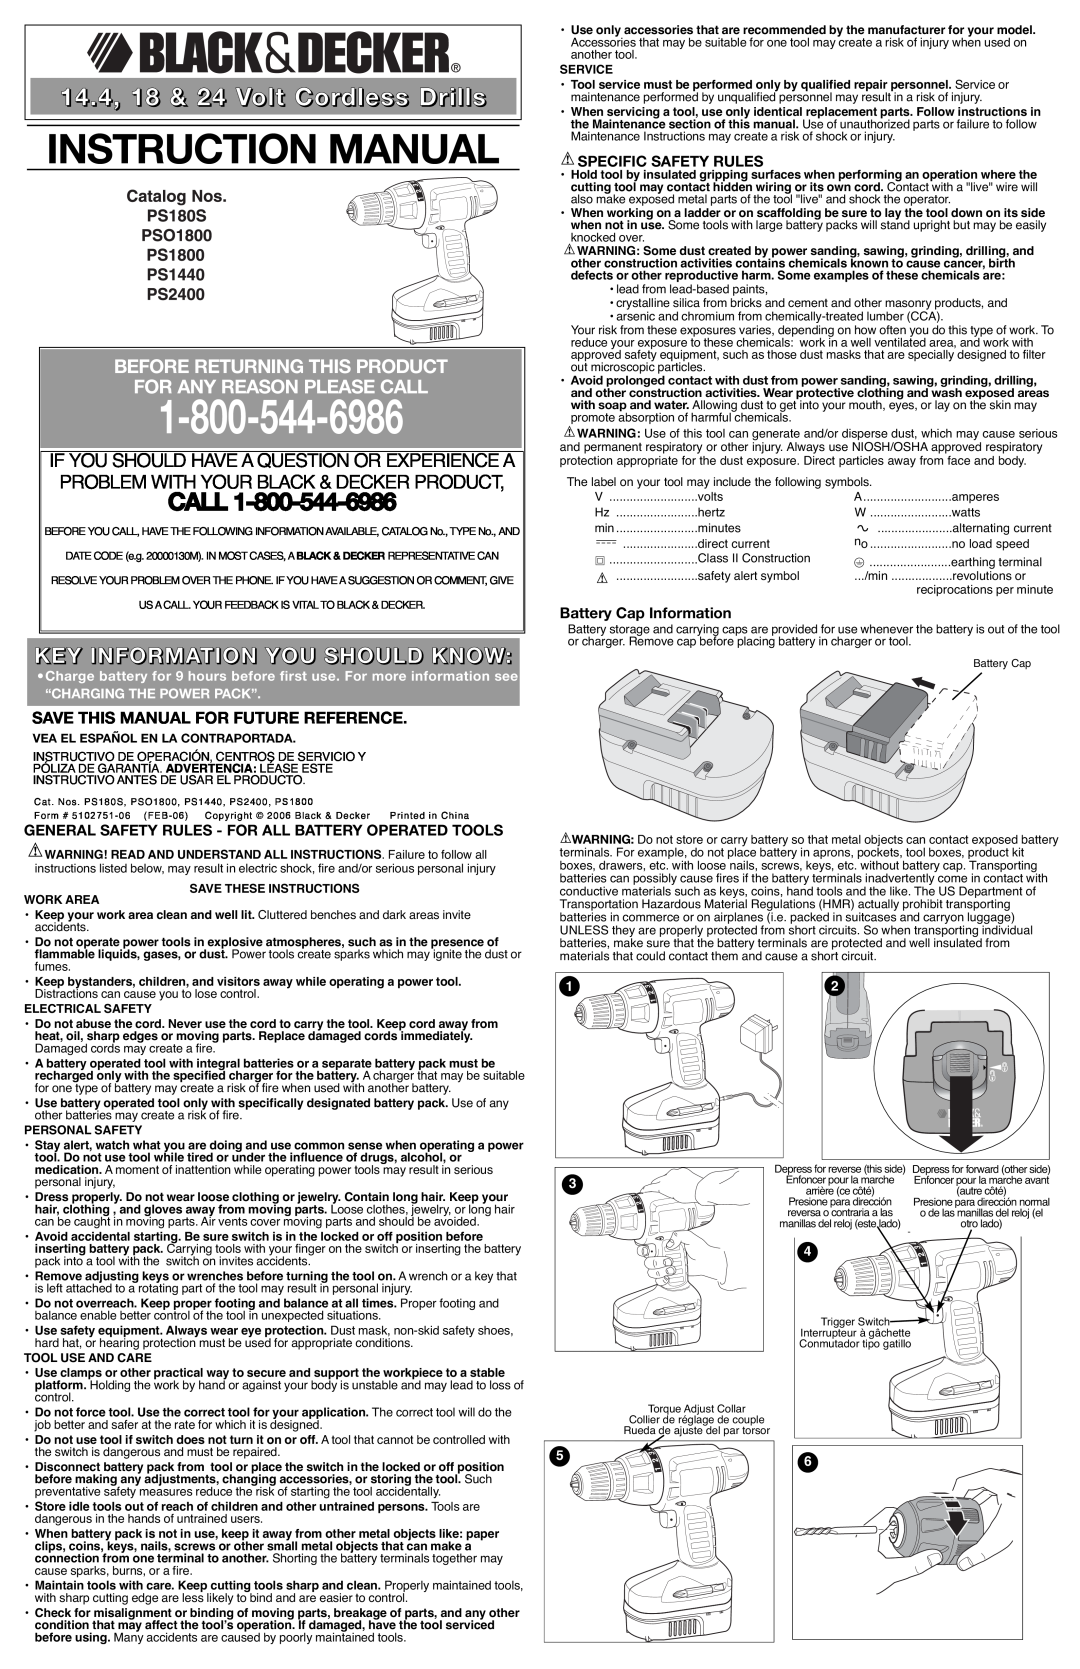 Black & Decker PS2400 instruction manual Key Information You Should Know, Specific Safety Rules, Battery Cap Information 